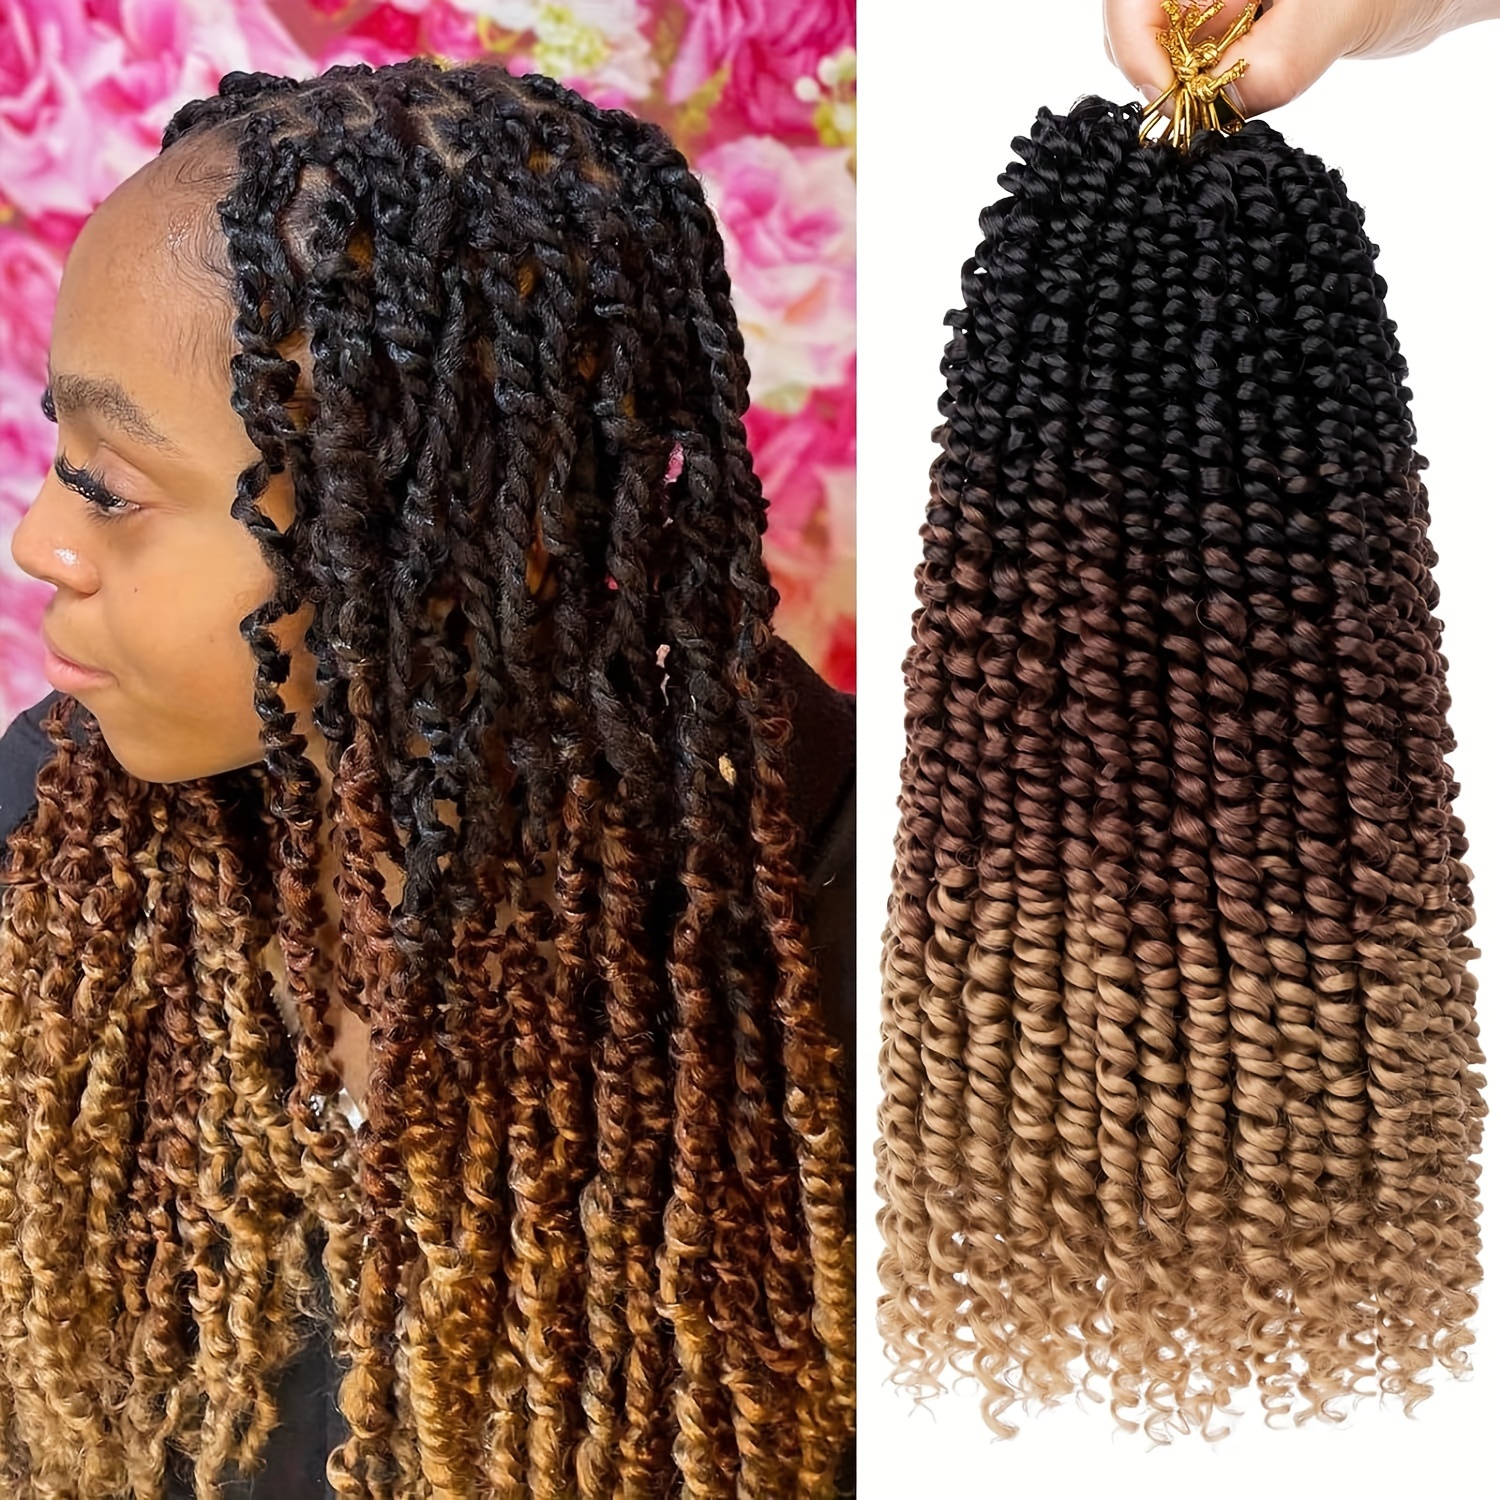 Passion Twist Crochet Hair 12 18 Bomb Pre Twisted Water Wave